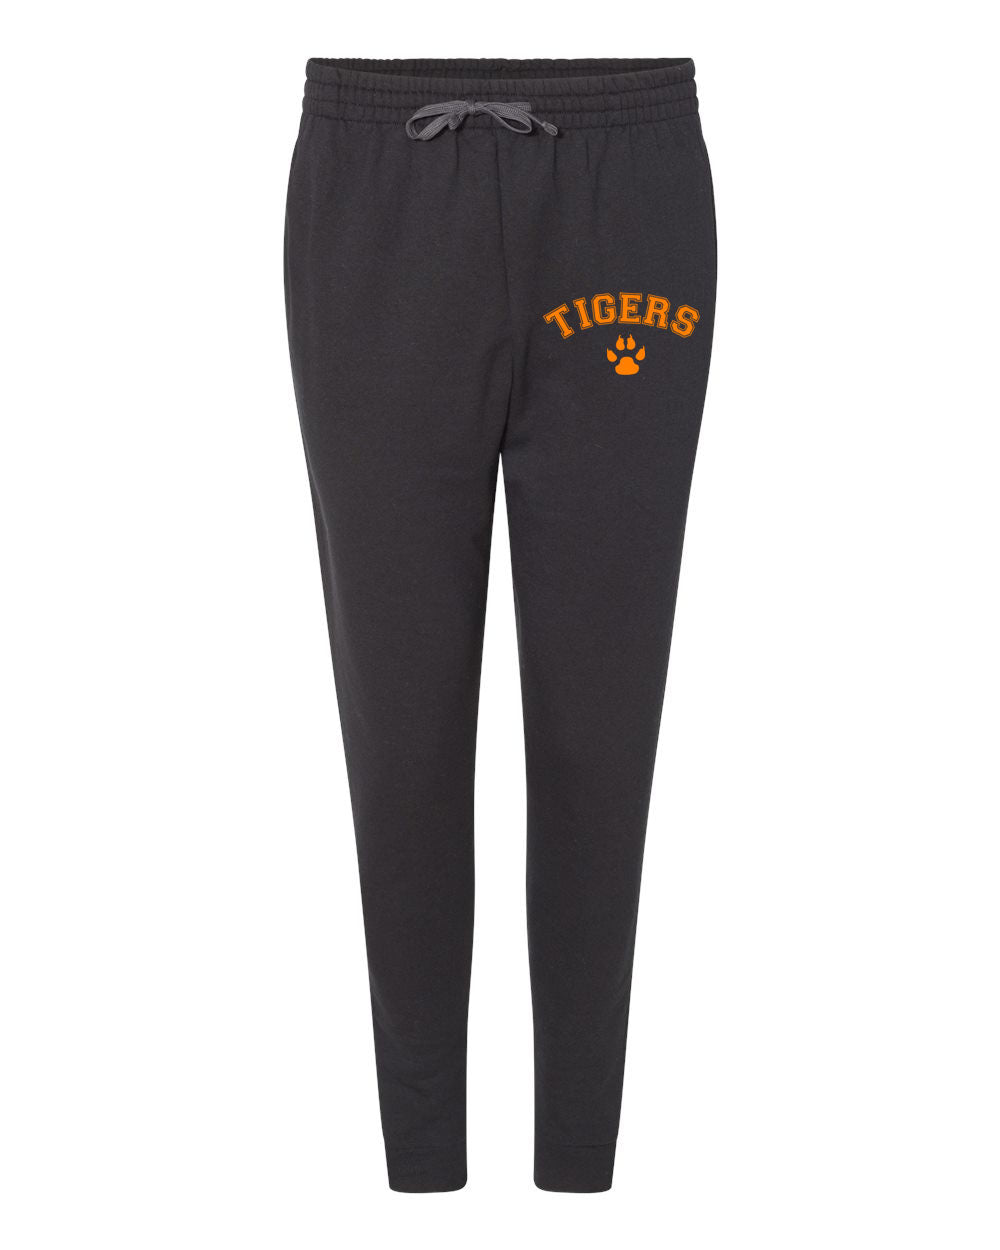 Tiger College Style Sweatpants